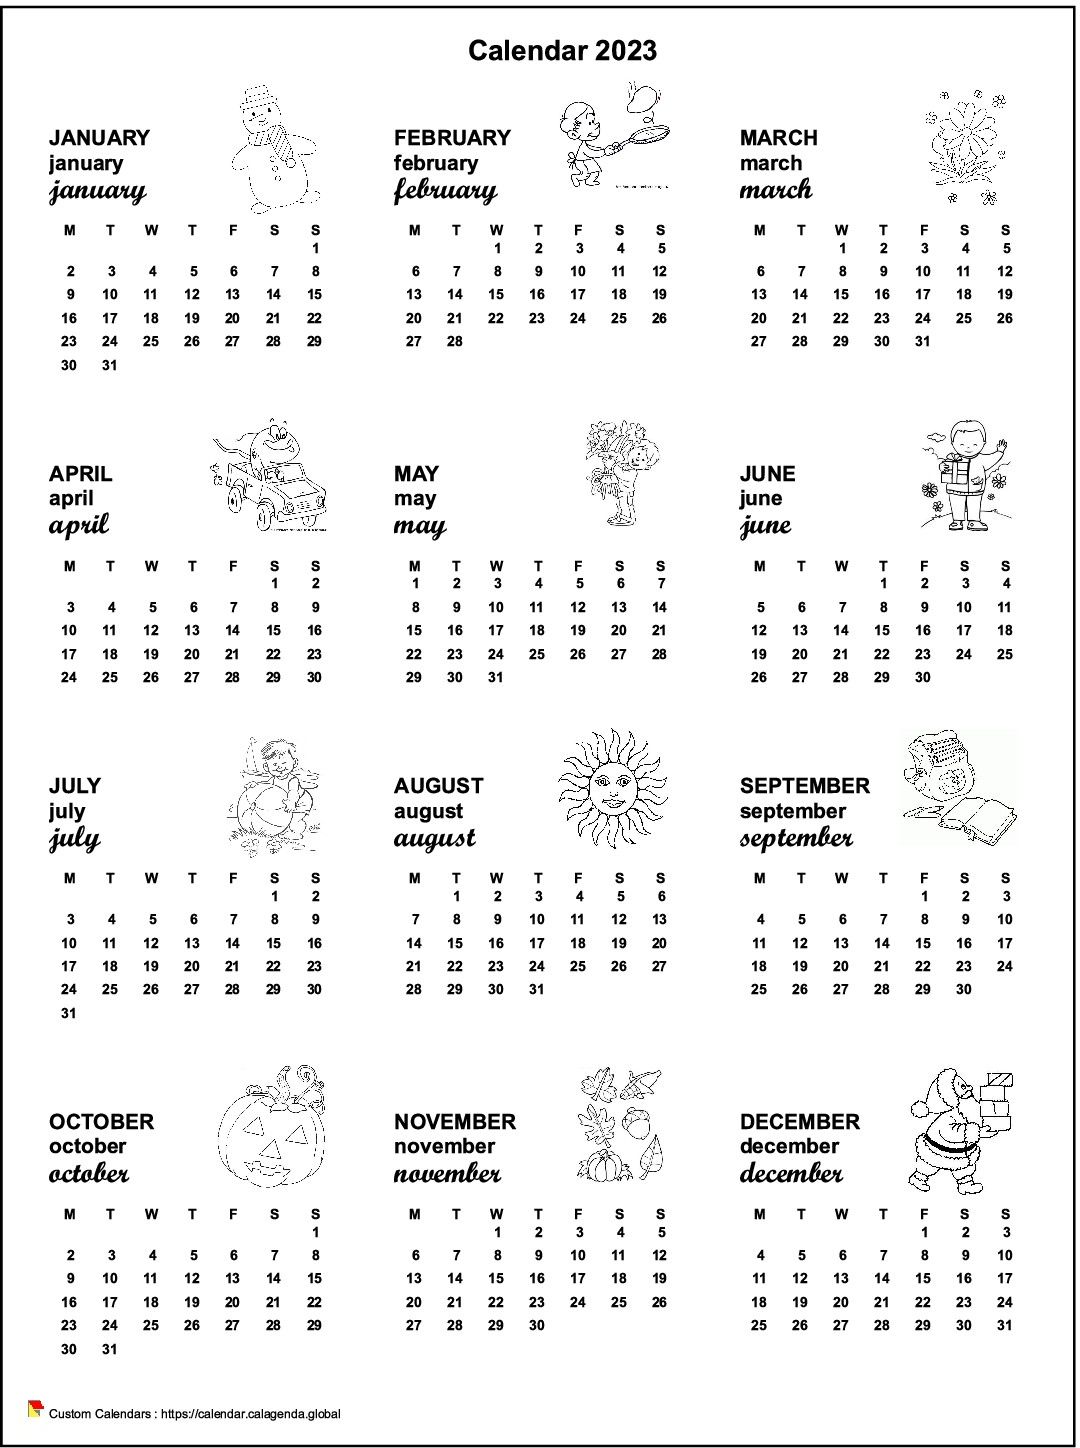 Calendar 2063 annual maternal and primary school